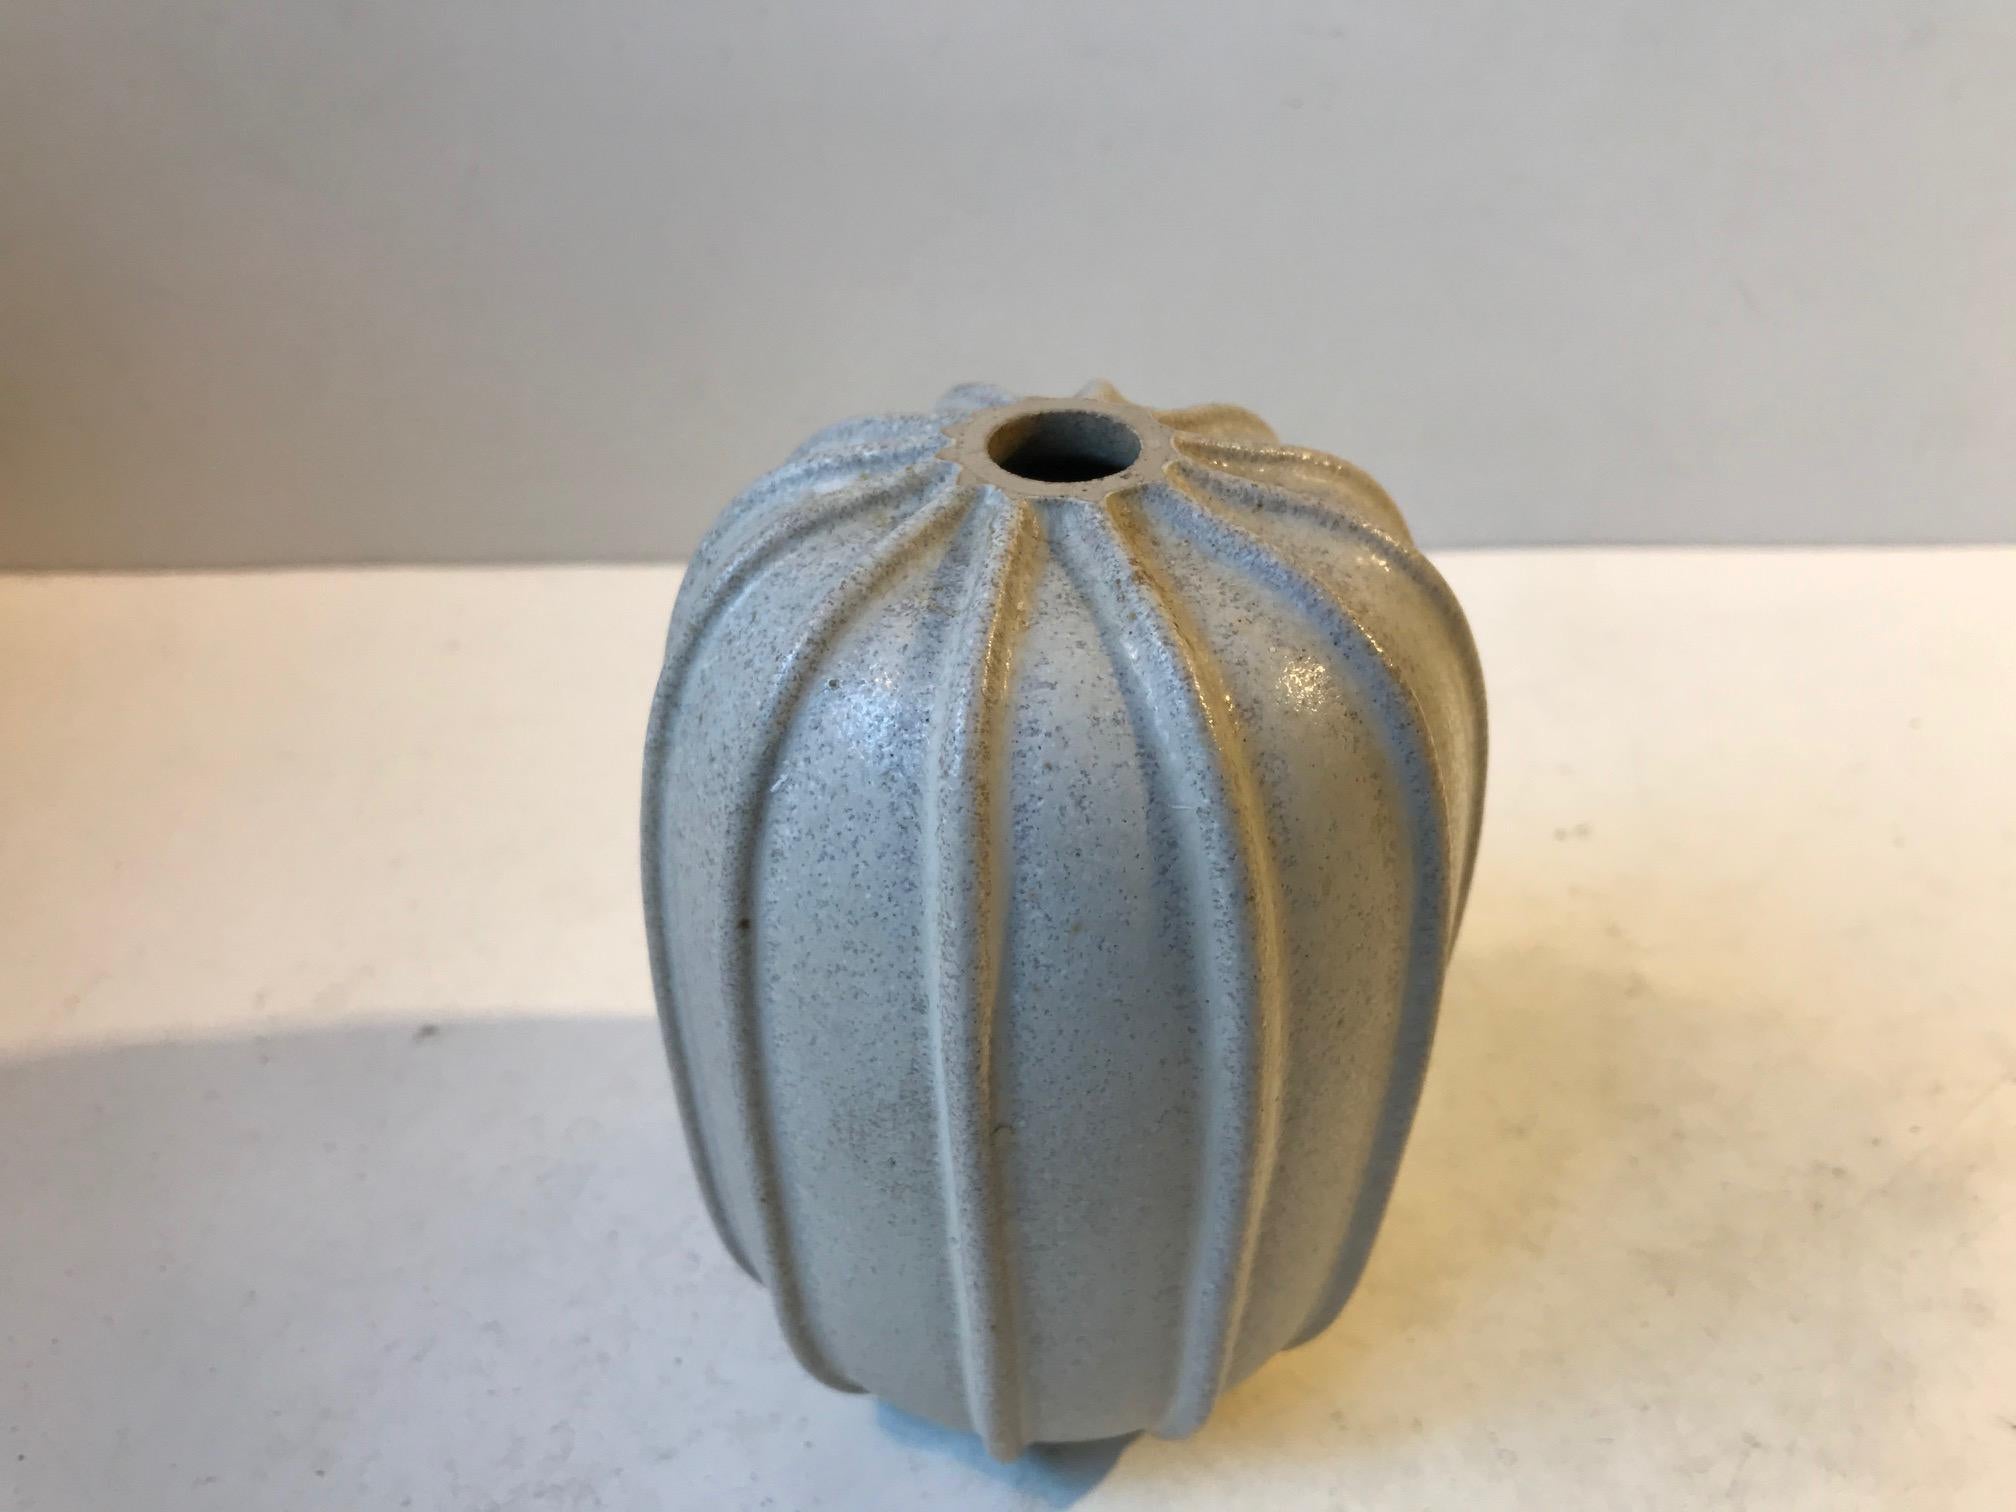 Stoneware vase decorated with vertical ribbings and of-white glaze with specks of blue. Designed by Arne Bang in his own workshop in the latter part of the 1930s. Measurements: H: 12 cm, D: 10 cm. This piece has been restored. Please see the